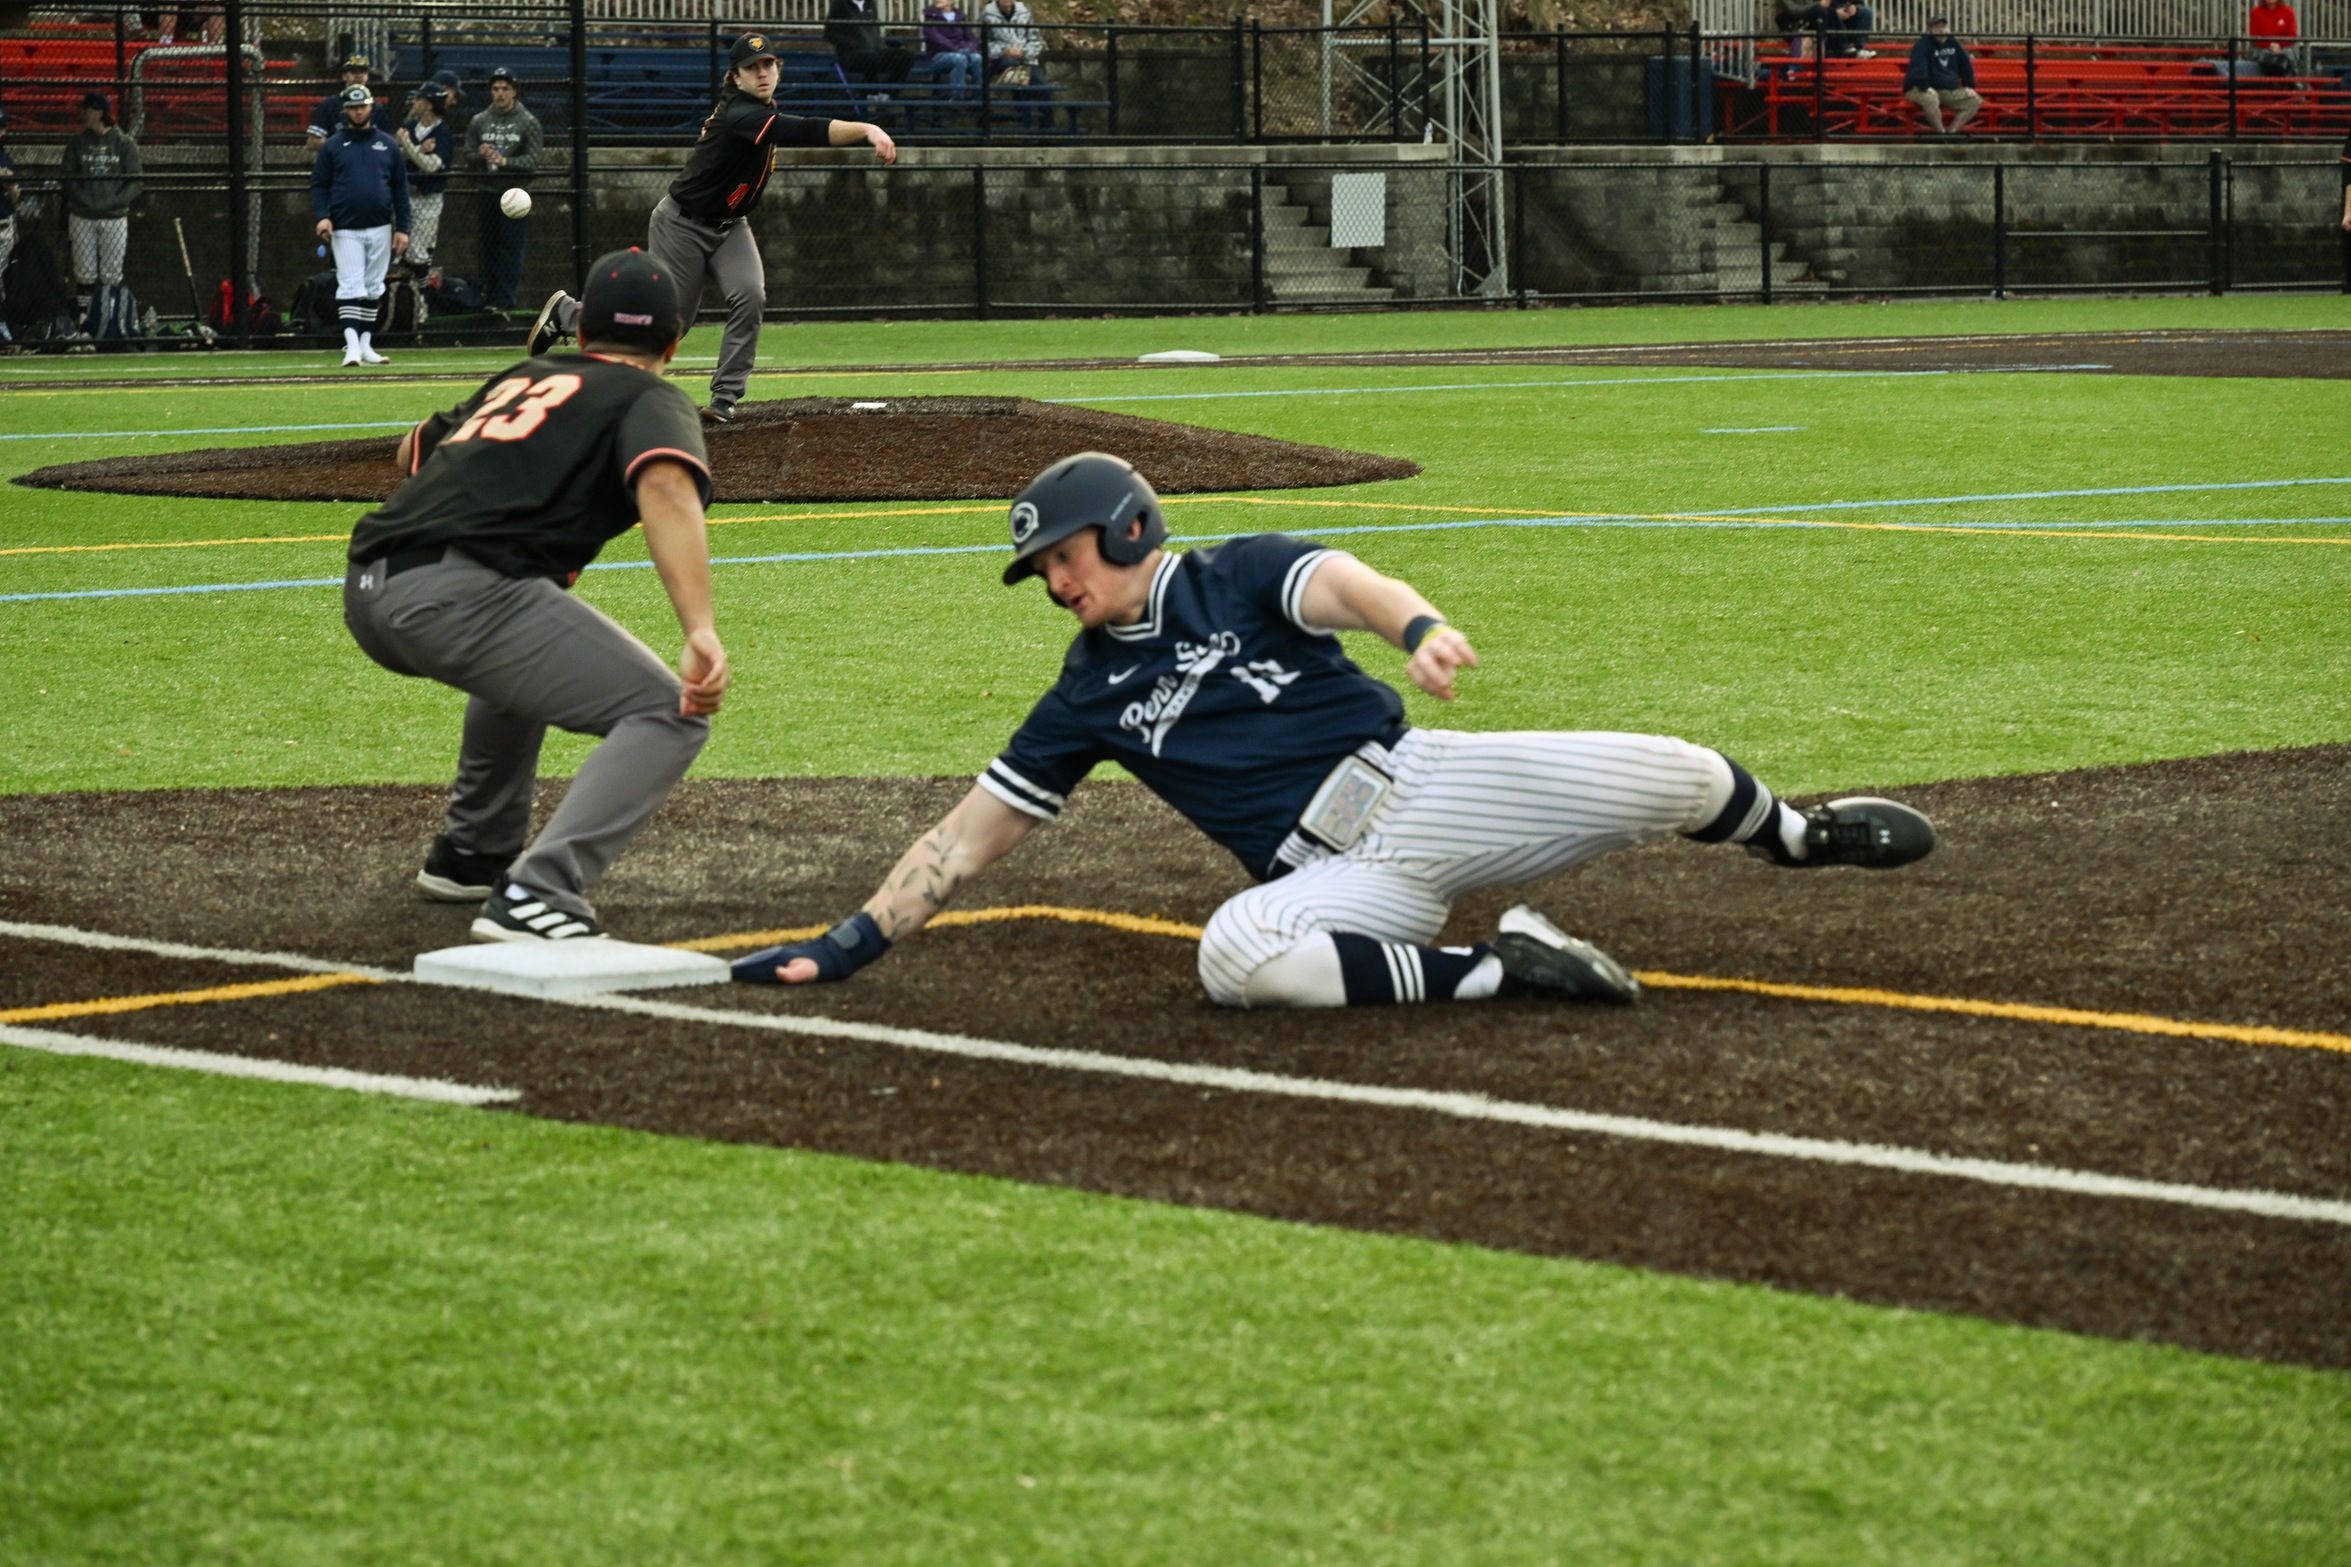 Scranton's Guy Mushow (10) slides back into first base during a game against Kings College at Schautz Stadium on Sunday. Scranton split with Kings (7-4, 6-11), earning their first win in 2024.